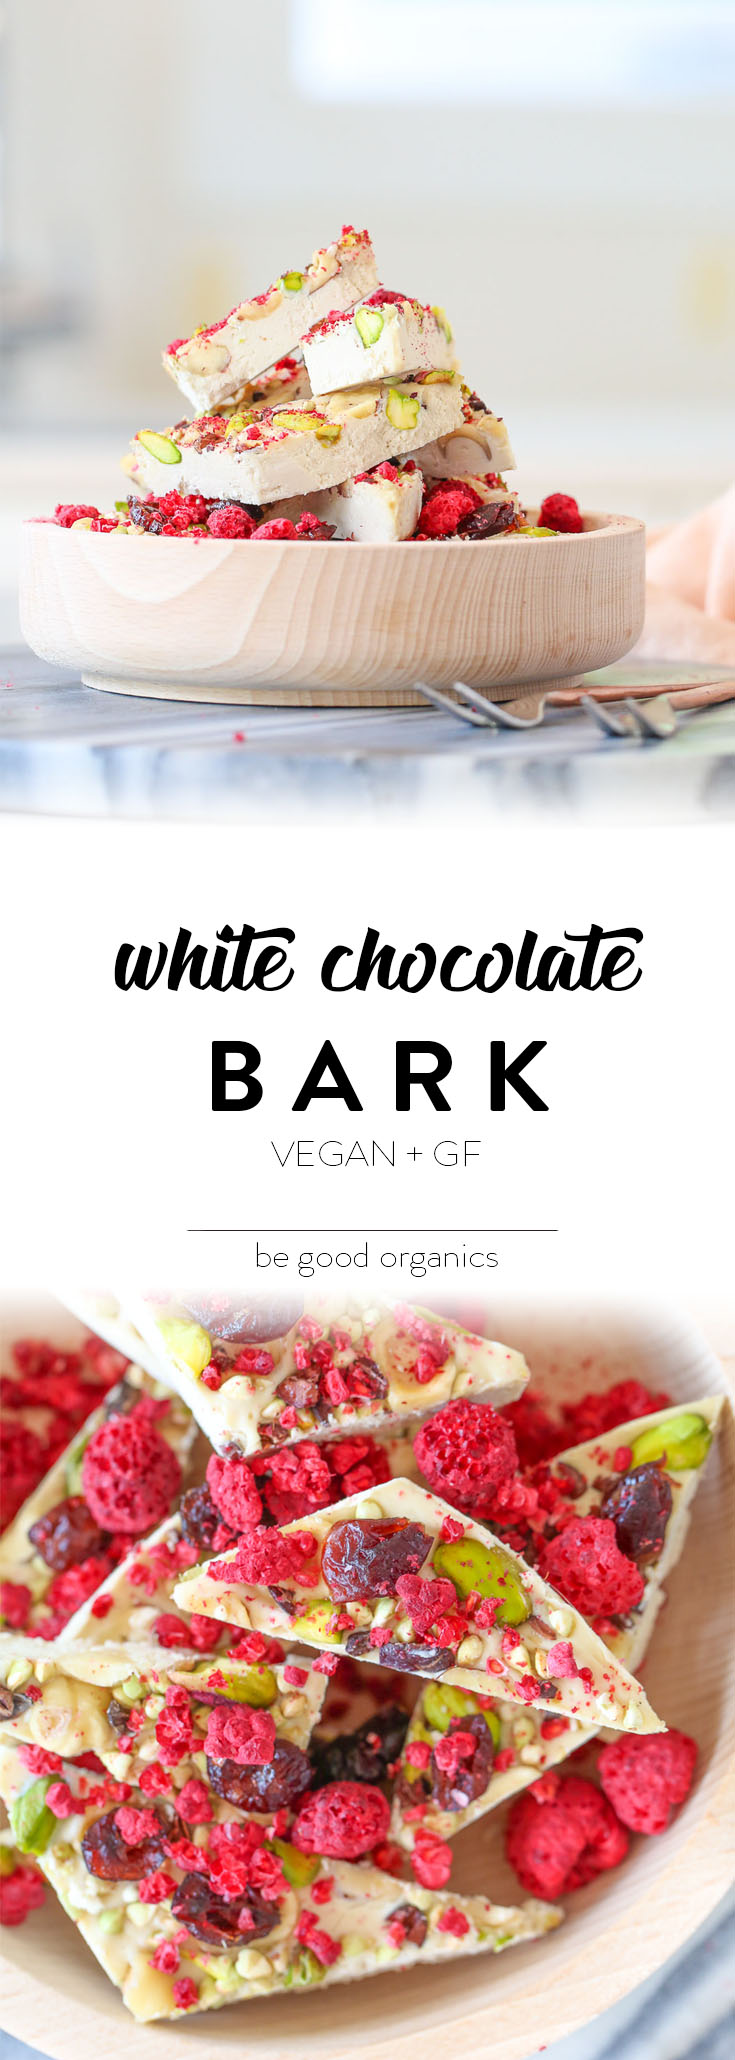 Were you a mad Milky bar fan when you were a kid? I’ve got my hands up! So now, this – a dairy & refined sugar free version, so you can satisfy those white choc cravings without the nasties. Also – 7 ingreds, 1 step, & perfect for making with the kiddos! Vegan, GF, paleo, keto, low sugar/carb.